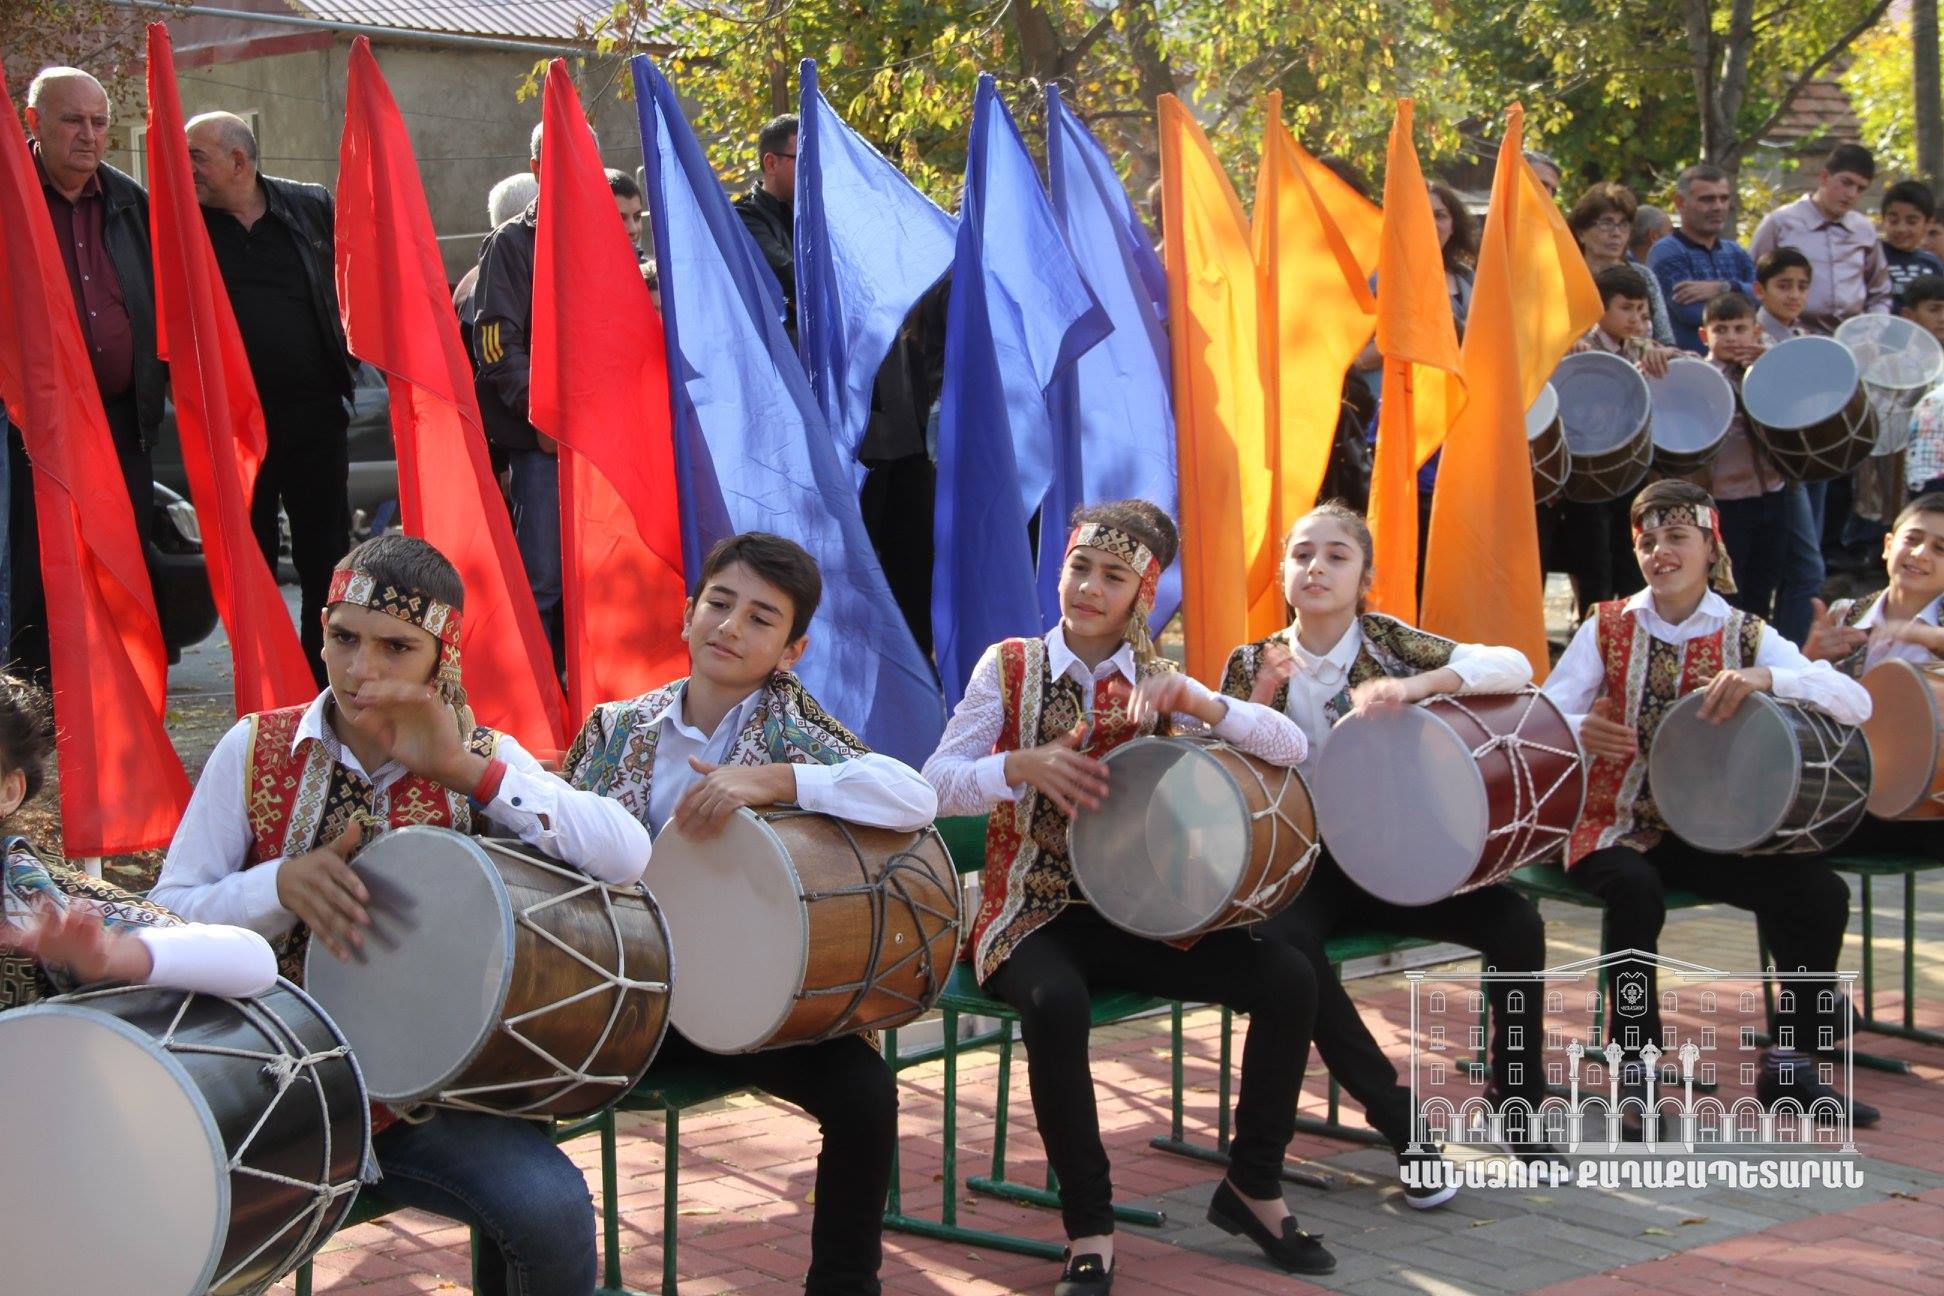 Dhol group during the city day